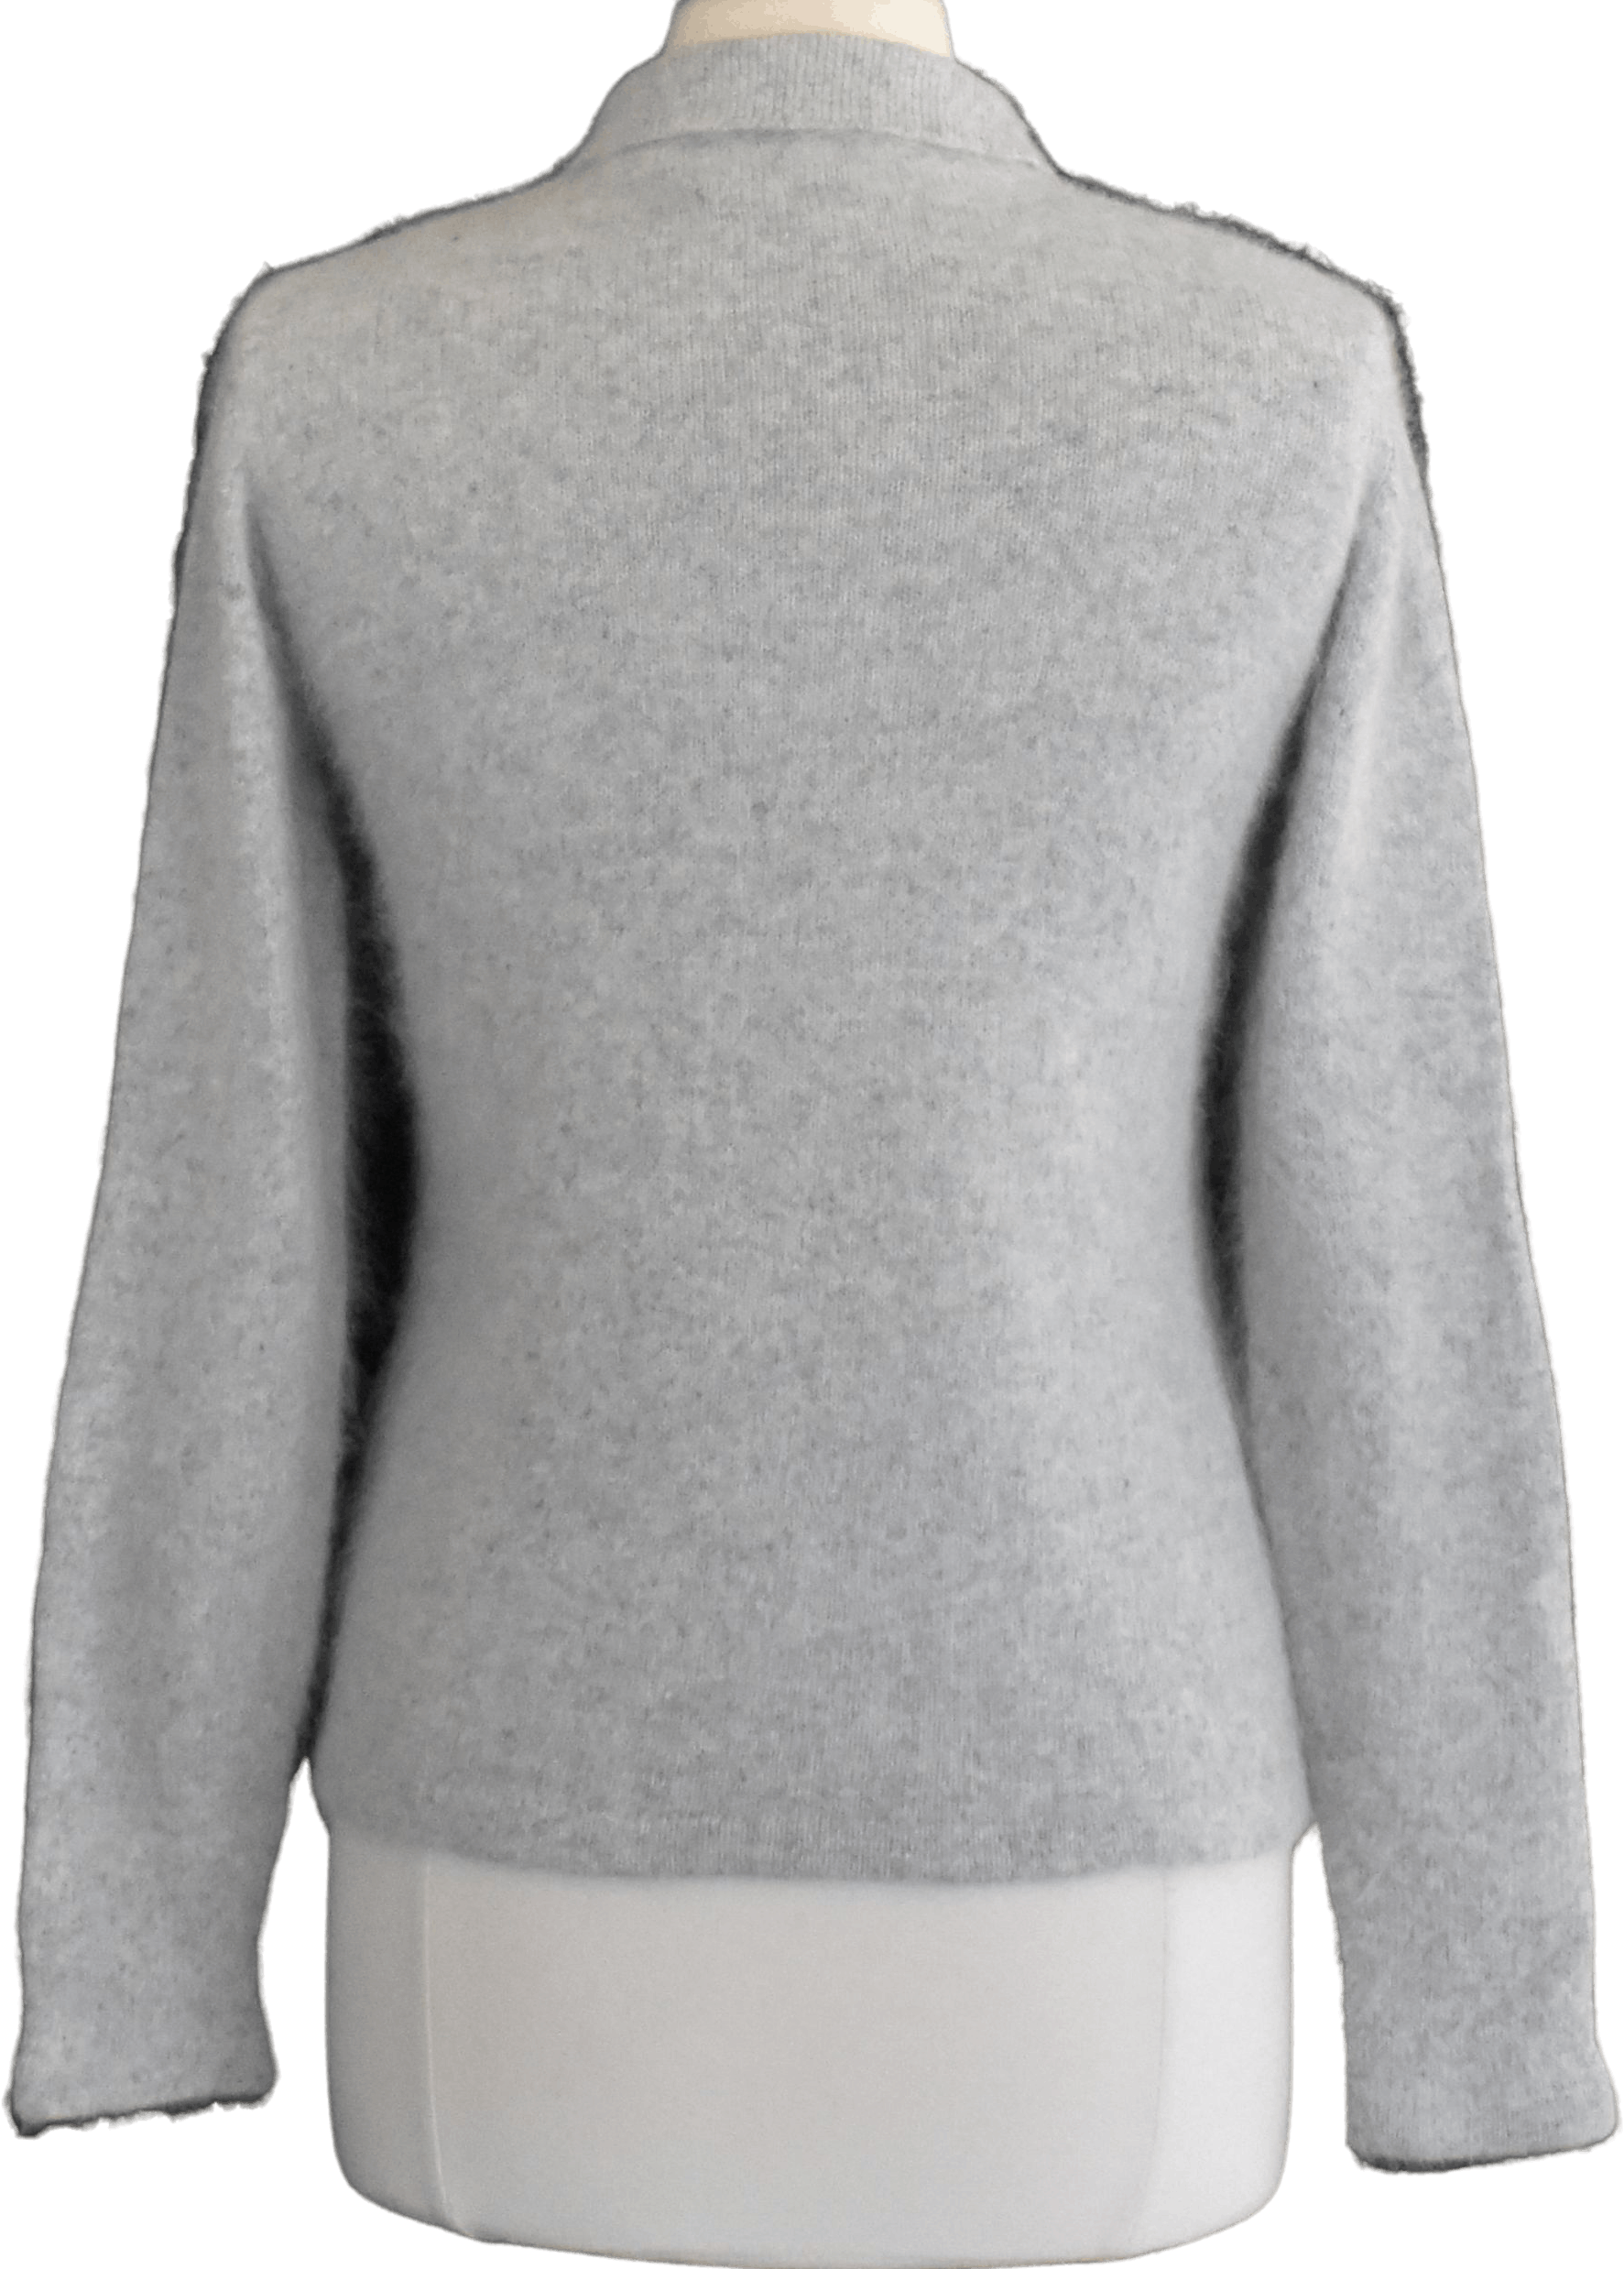 Vintage 90's Gray Angora Blend Cardigan Sweater by Garland | Shop THRILLING